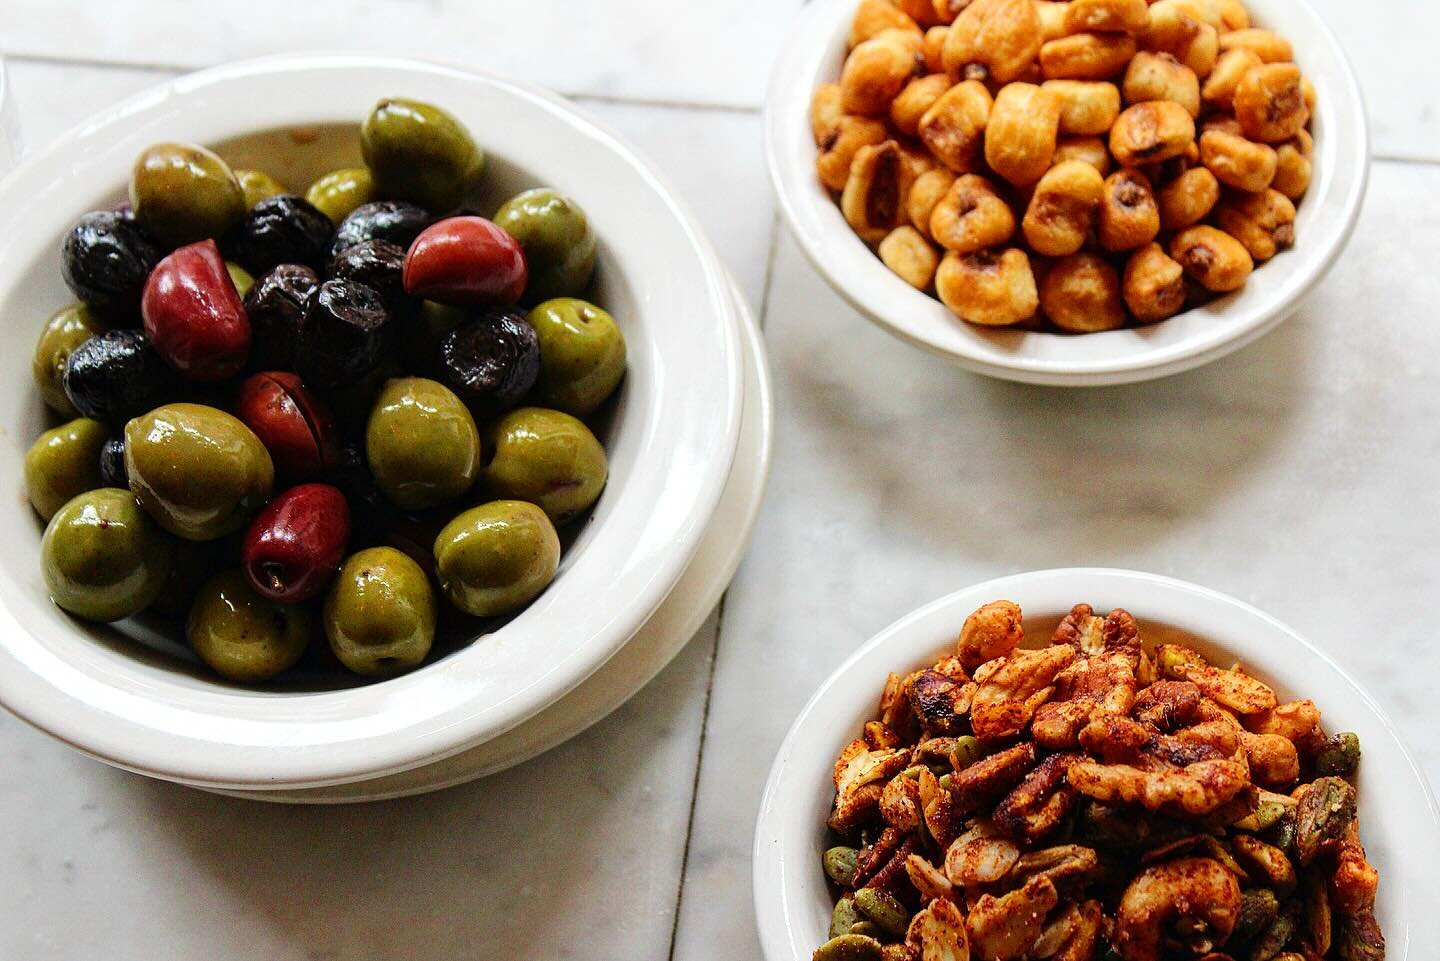 Craving a salty snack while imbibing? Well both bars now have snacks! 
Choose from salty corn nuts, mixed olives, or housemade voodoo spiced nuts (inspired by @realzappschips voodoo flavor!)